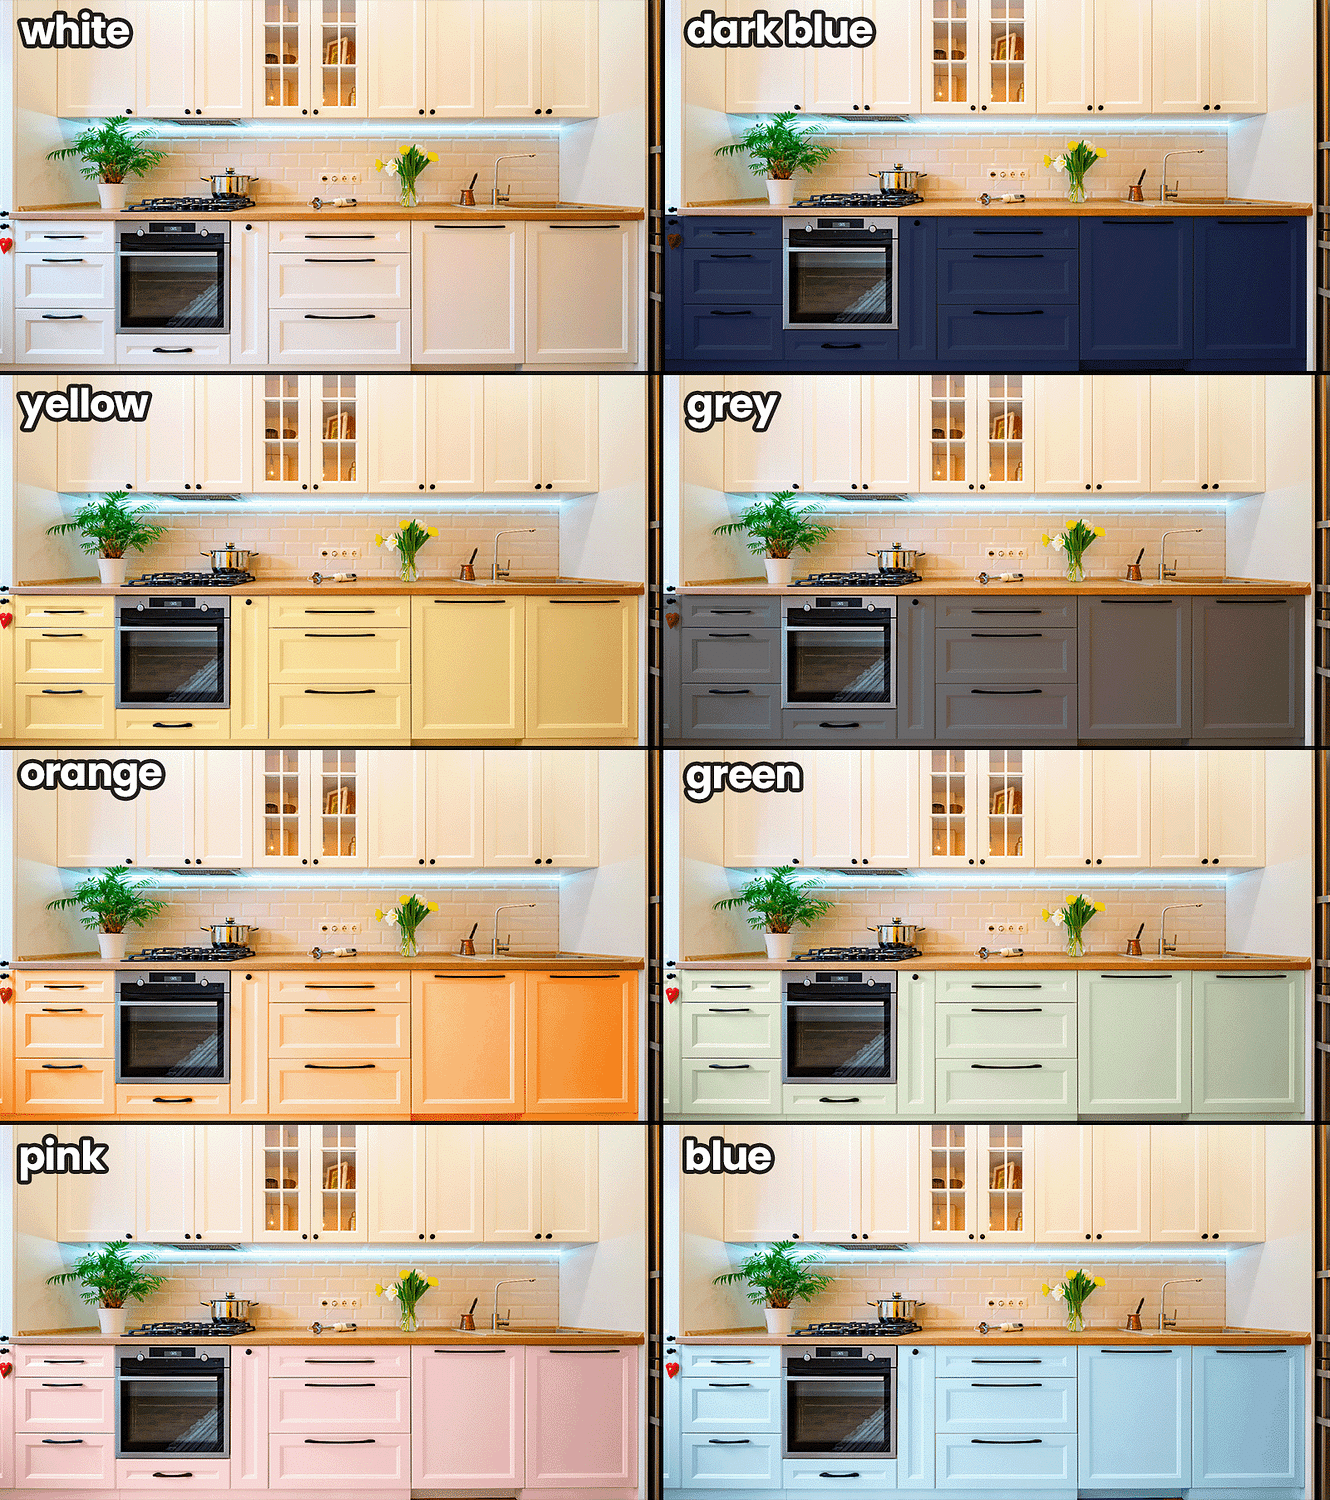 8 versions of the same kitchen cabinets in 8 different colours: white, yellow, orange, pink, dark blue, grey, green, and blue.